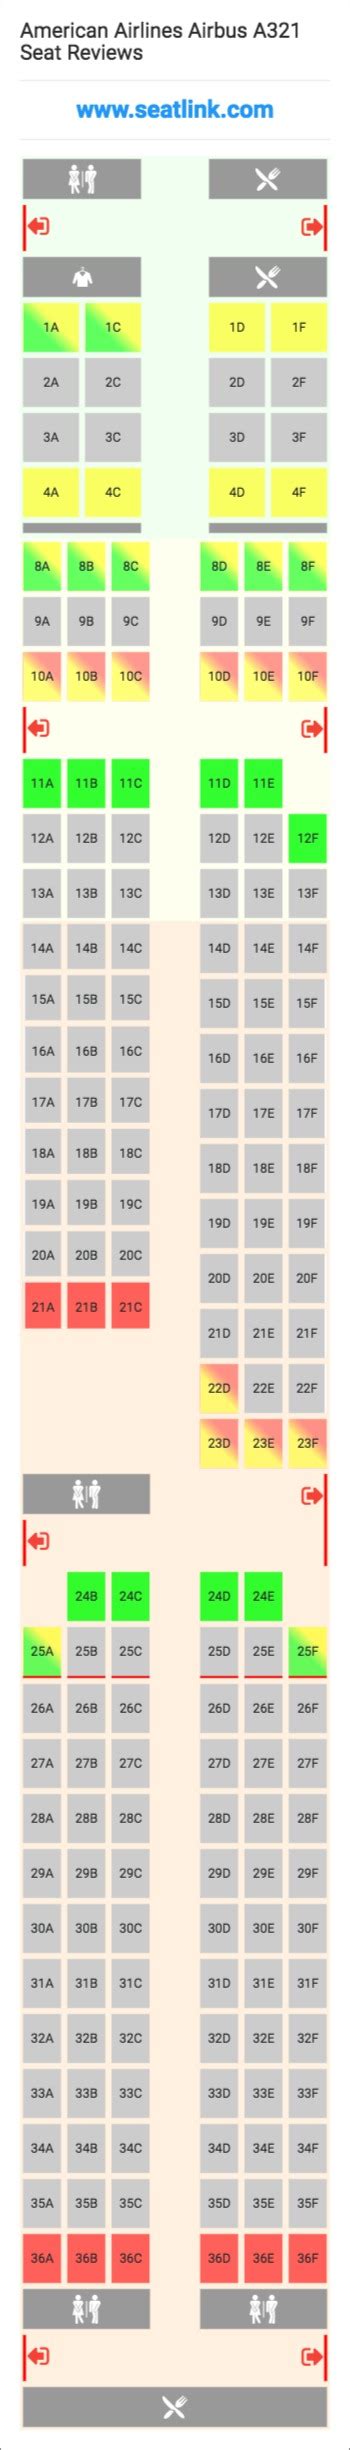 American Airlines Seating Chart A321 Awesome Home